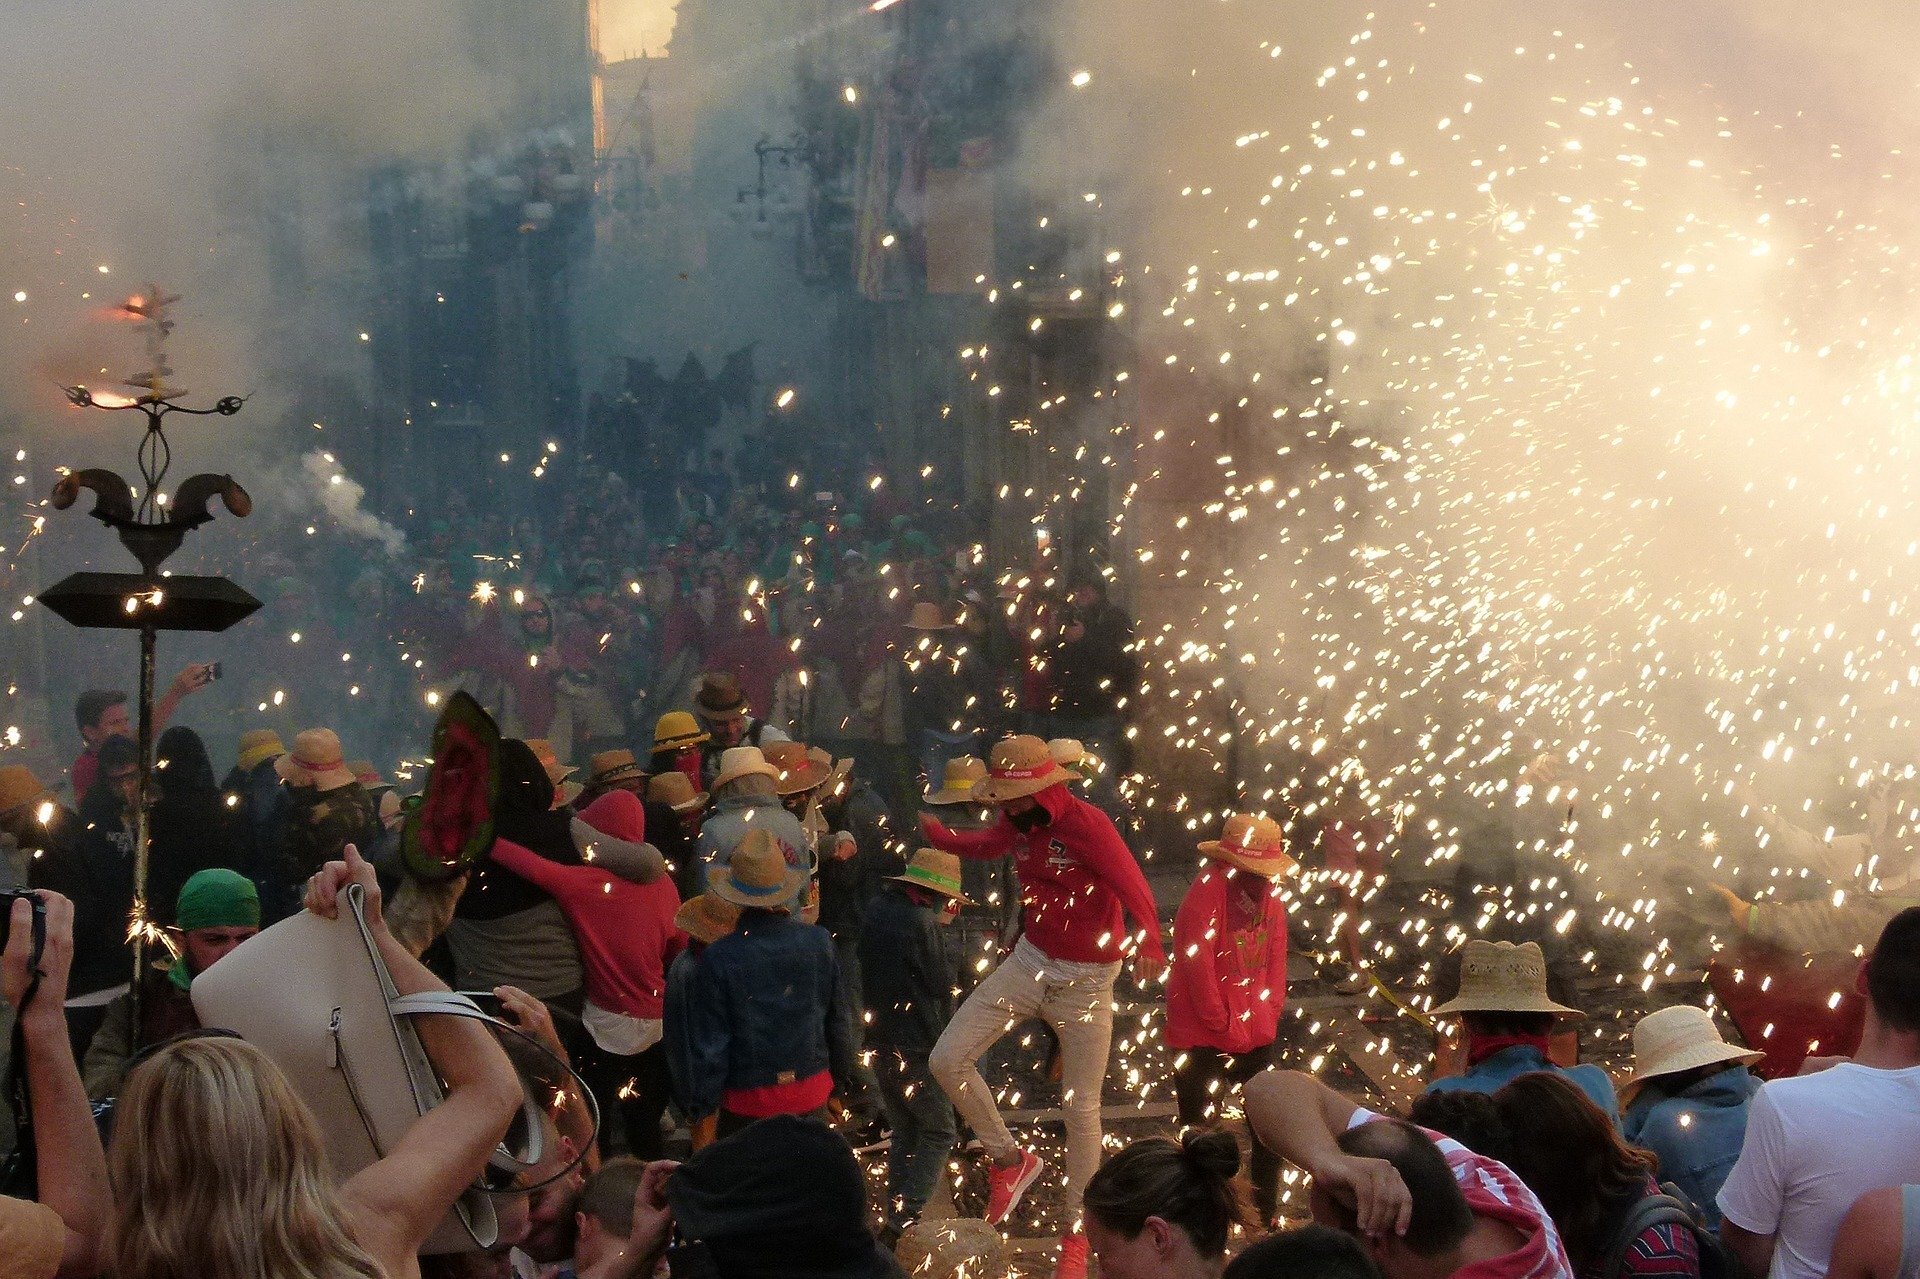 Festivals in Tarragona. How people celebrate is important to how they identify themselves. Photo by Marc Pascual on Pixabay.